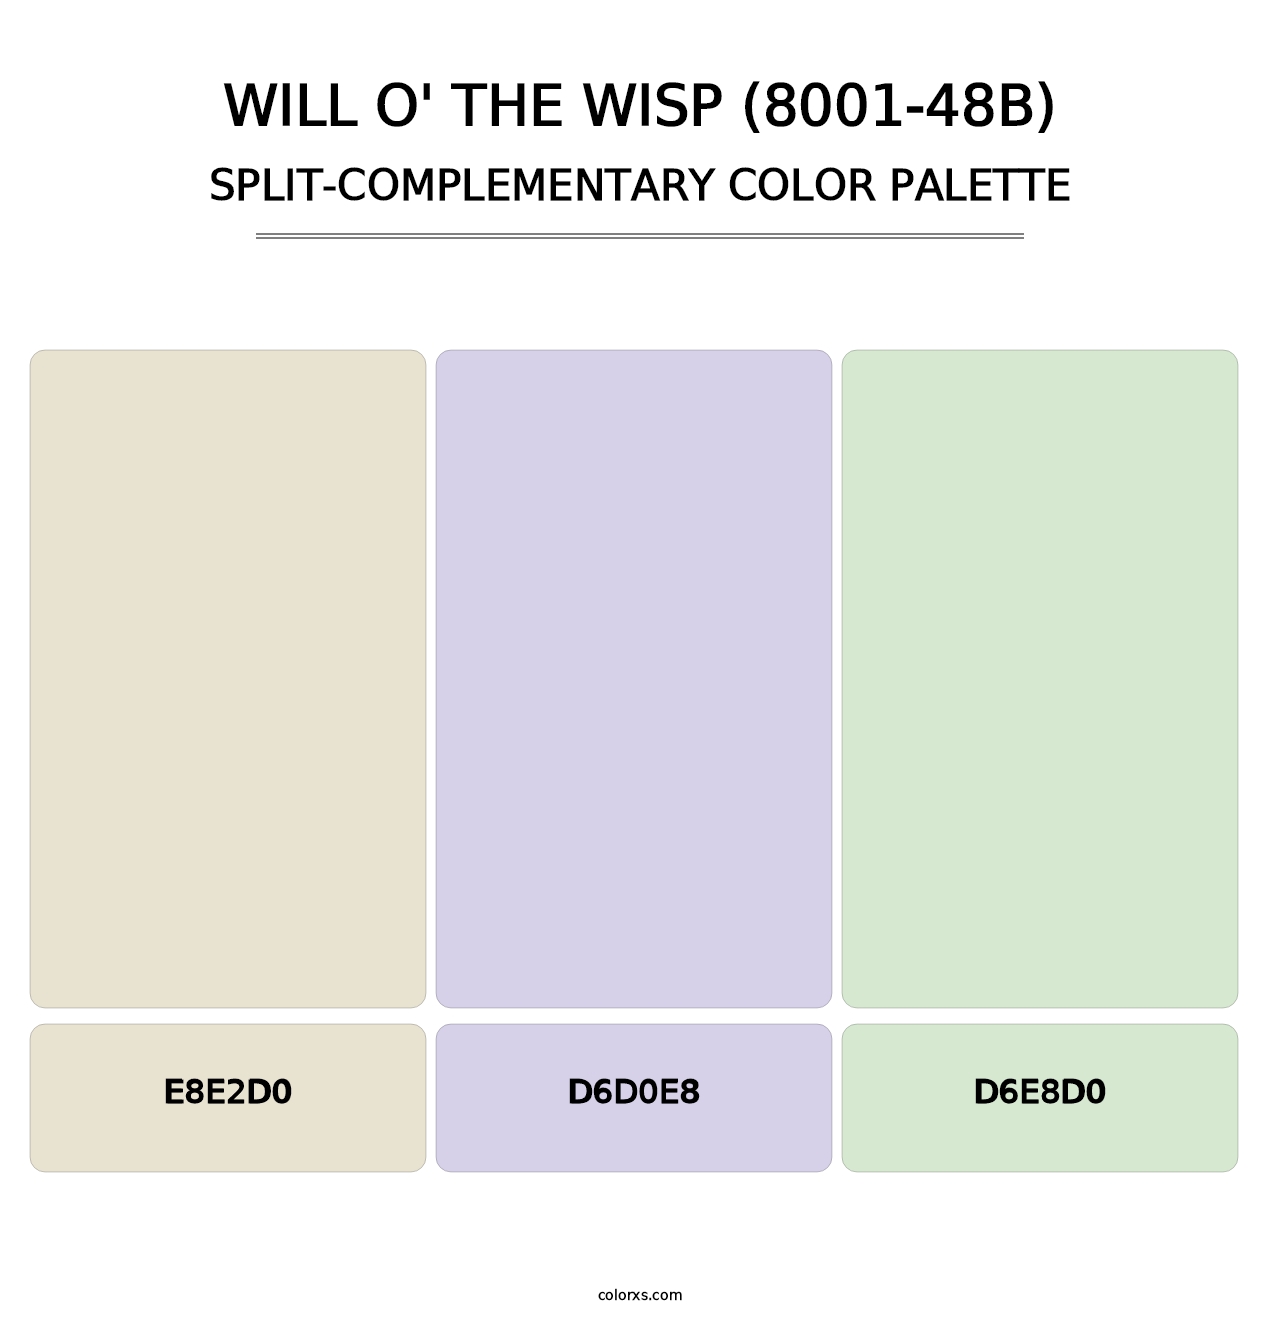 Will o' the Wisp (8001-48B) - Split-Complementary Color Palette